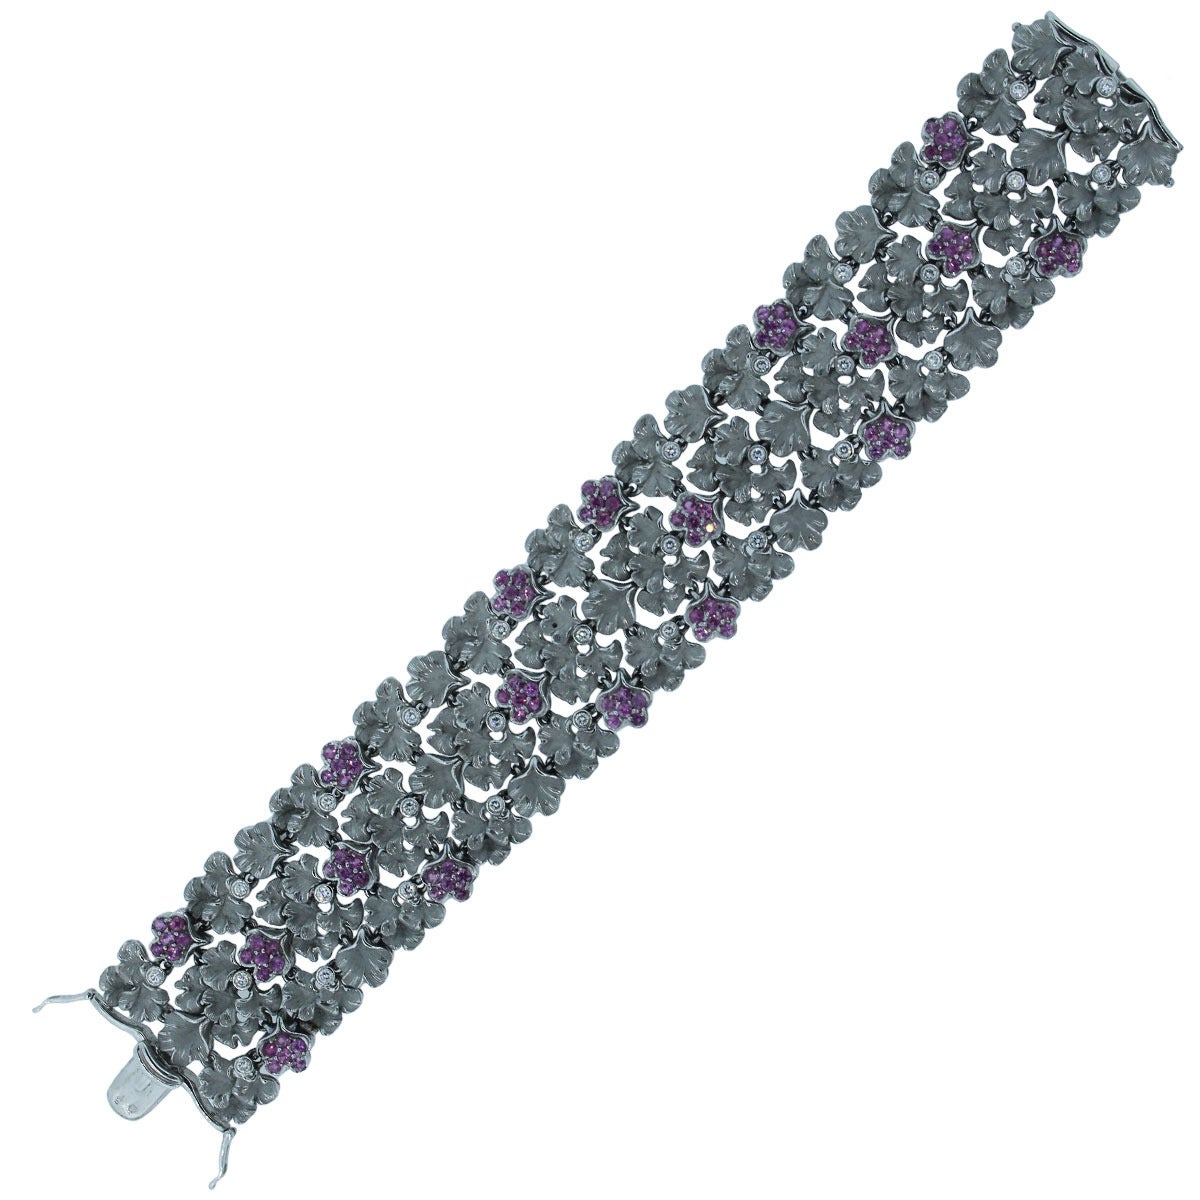 Style: Carrera y Carrera Pink Sapphire and Diamond Bracelet
Metal: 18k White Gold
Diamonds Details: Approximately 0.83ctw of Diamonds. Diamonds are F in color and VS in clarity
Gemstone Details: Approximately 4.03ctw of Round shape Pink